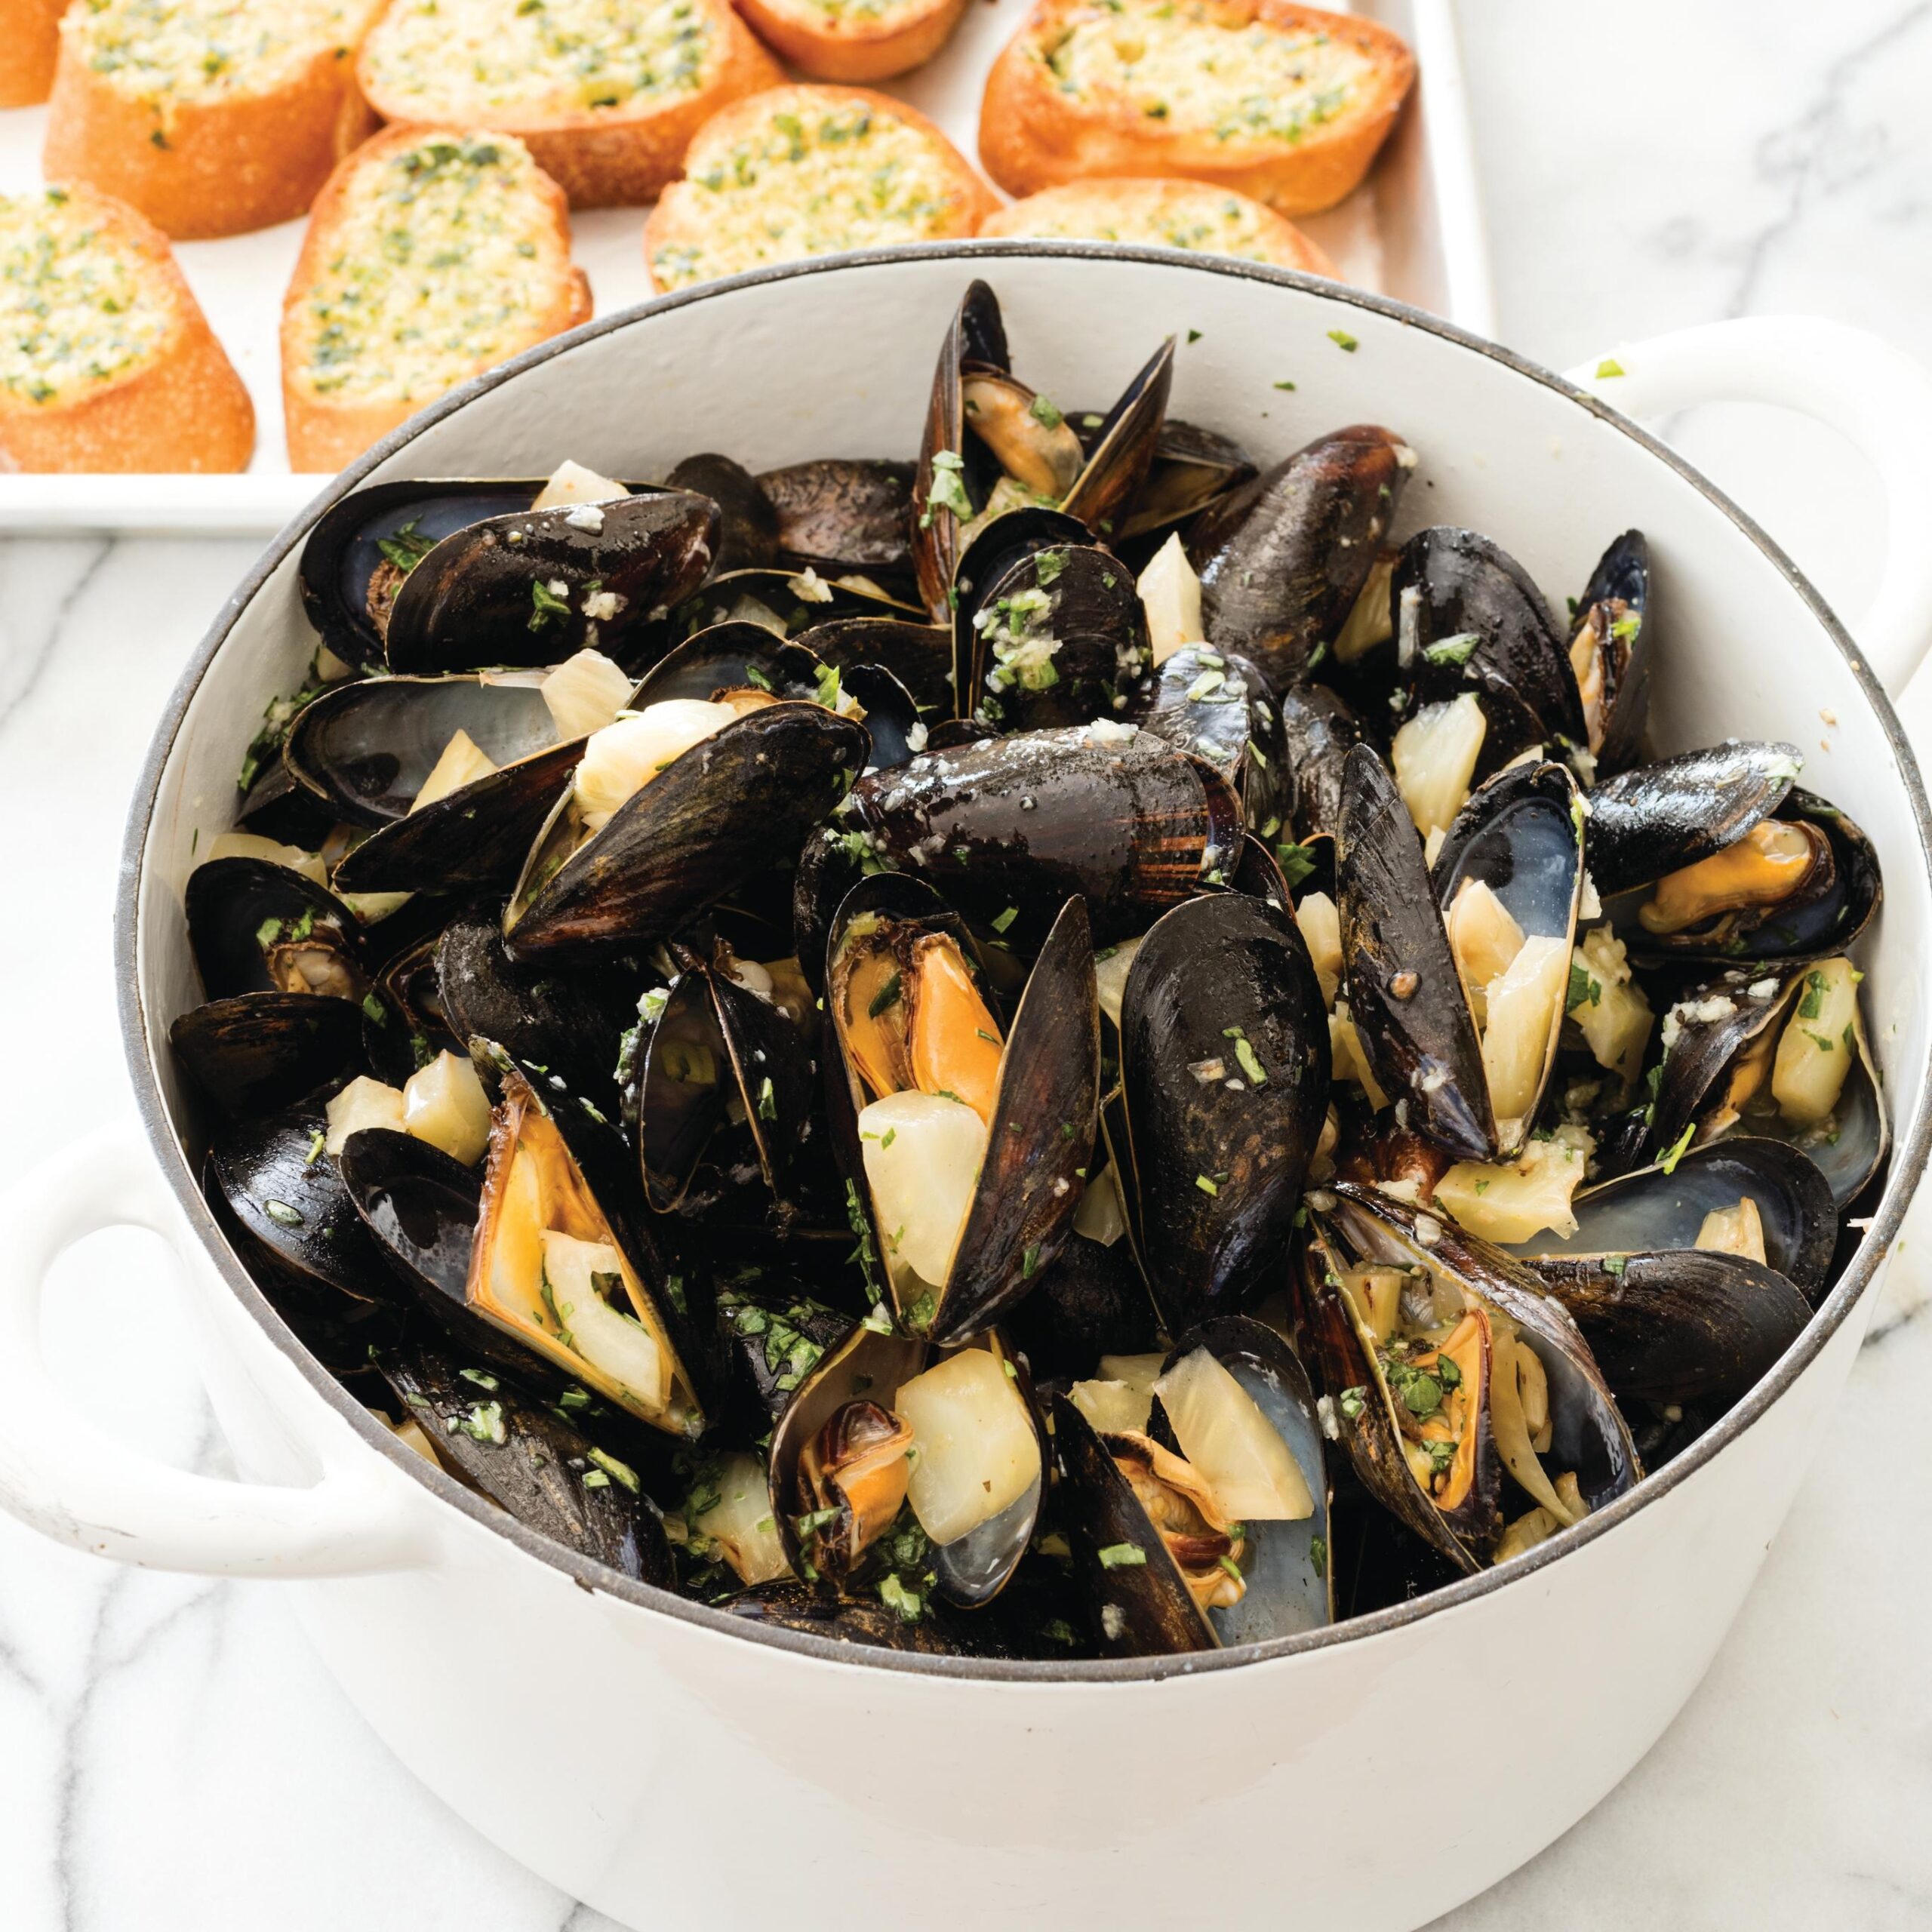  The irresistible aroma of white wine steamed mussels will leave everyone wanting more.